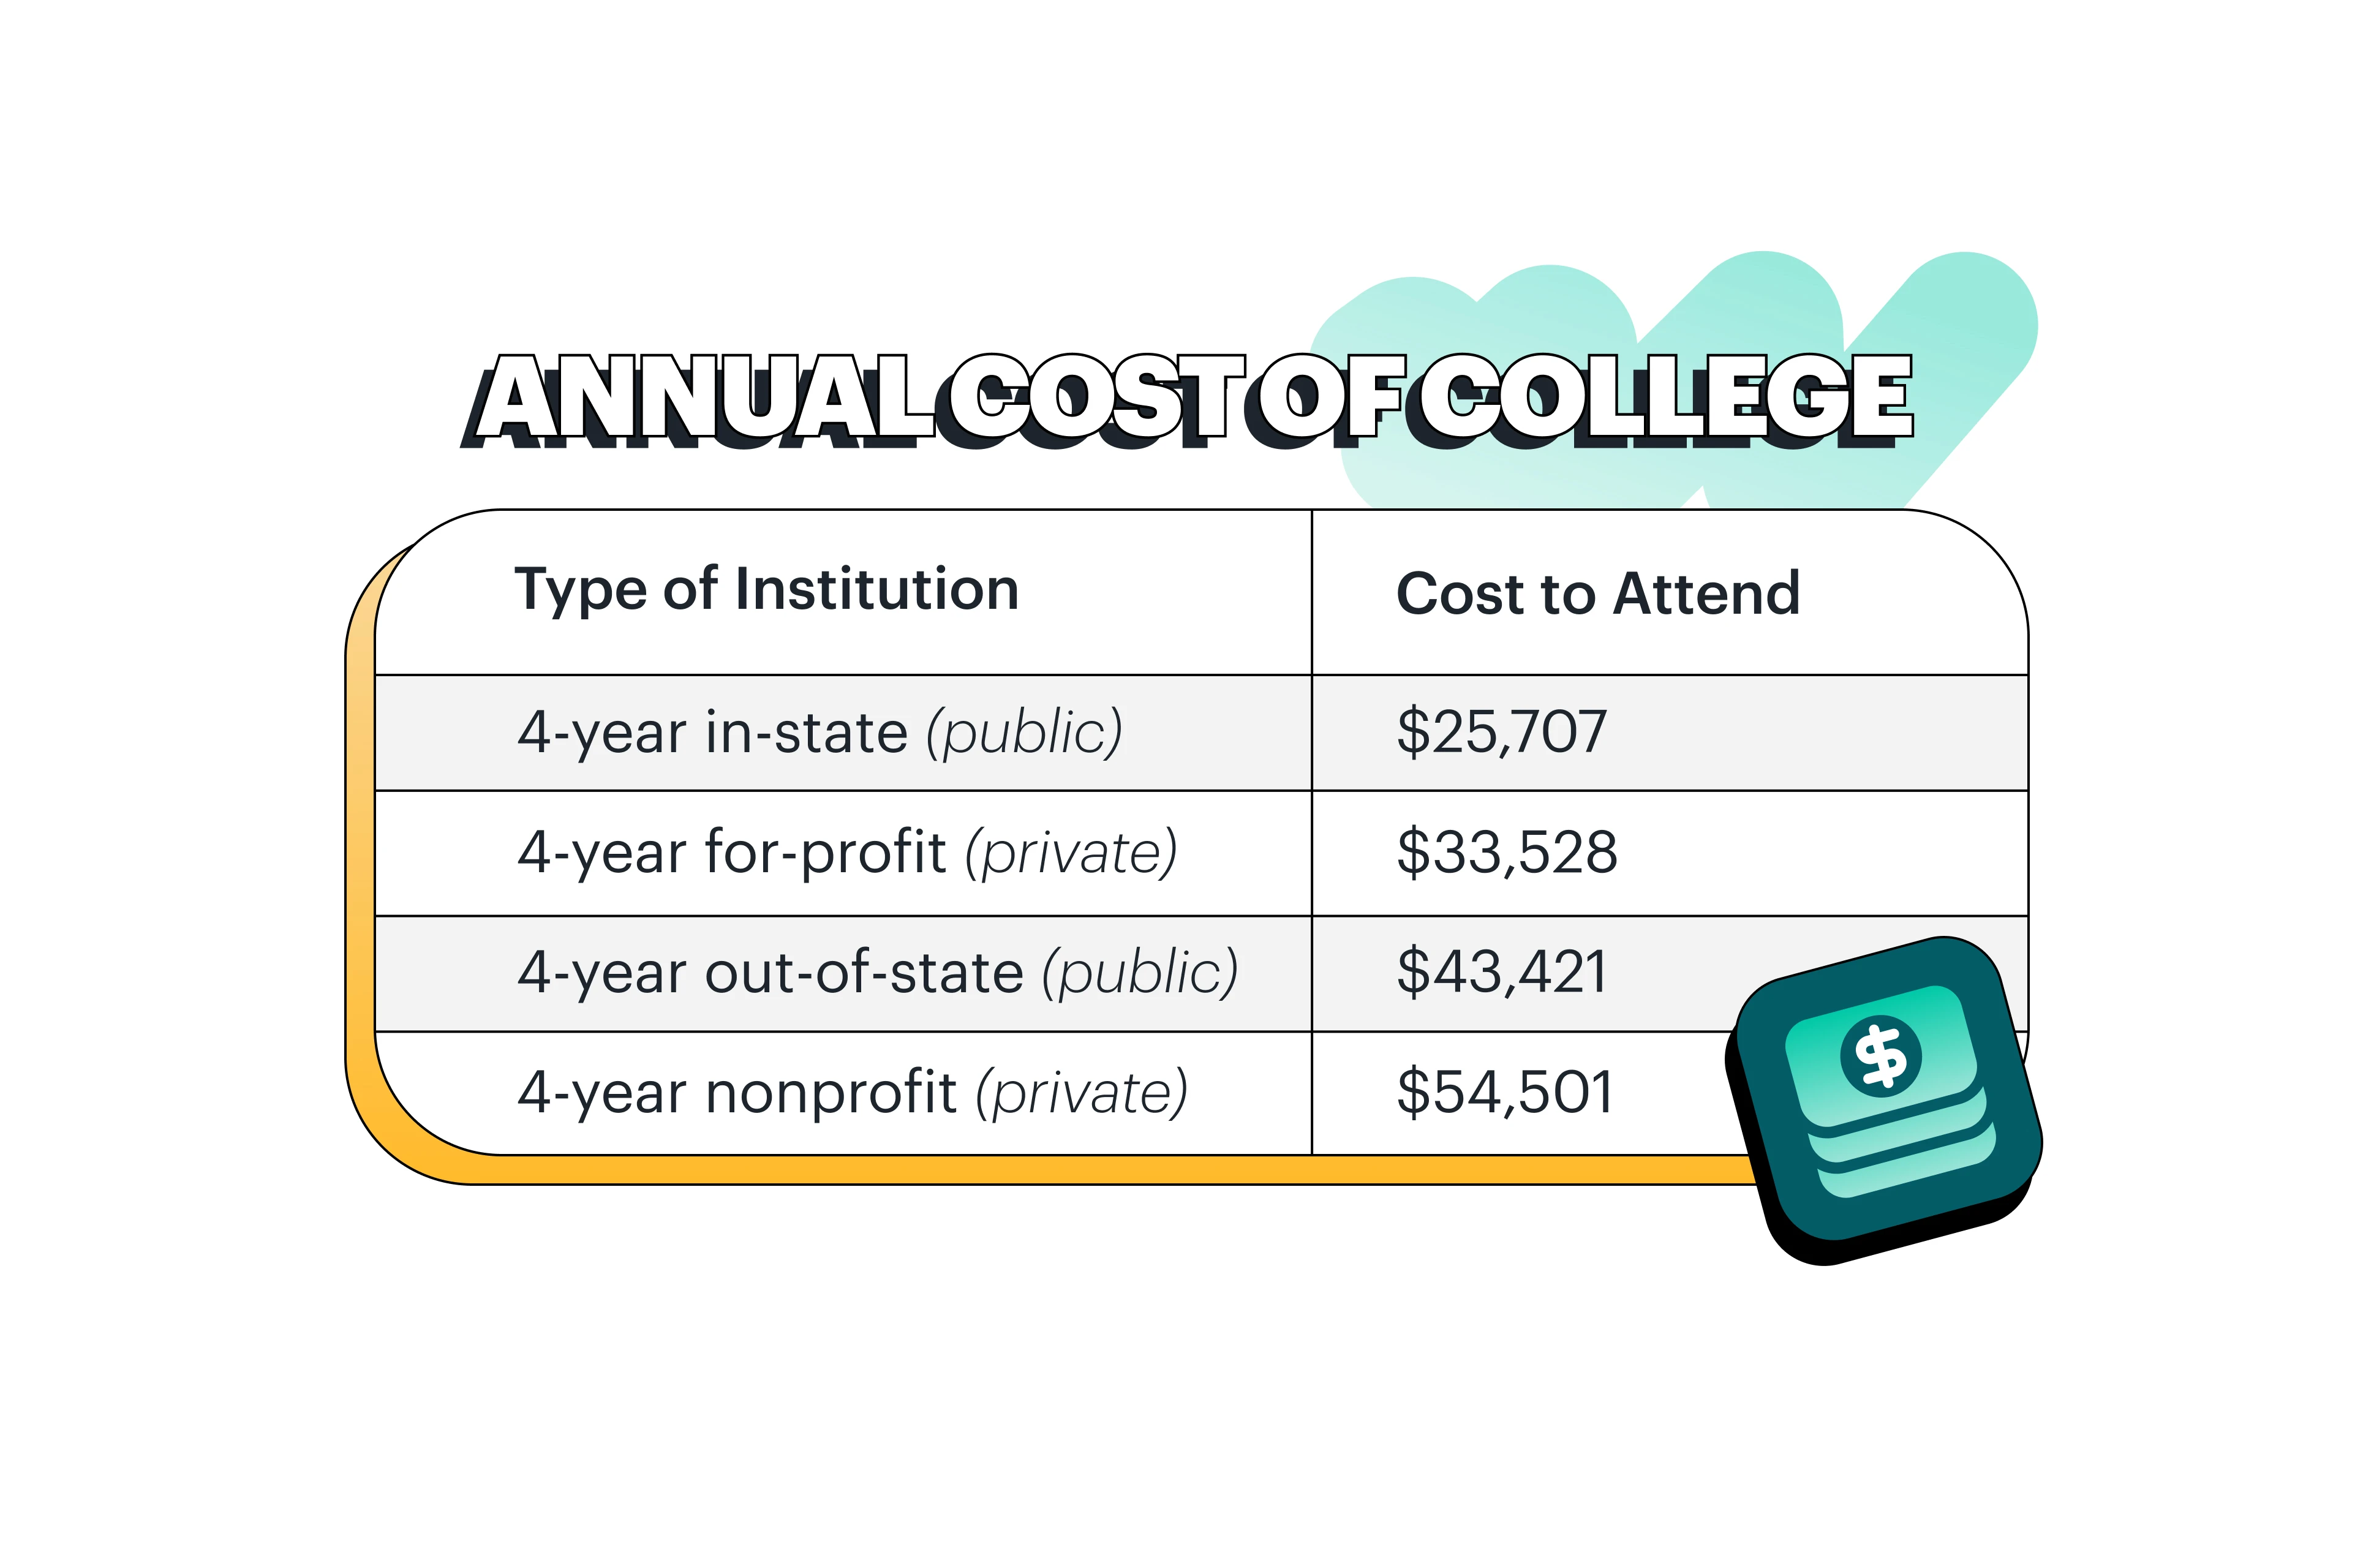 Annual cost of college table with types of institutions on the left and cost to attend on the right